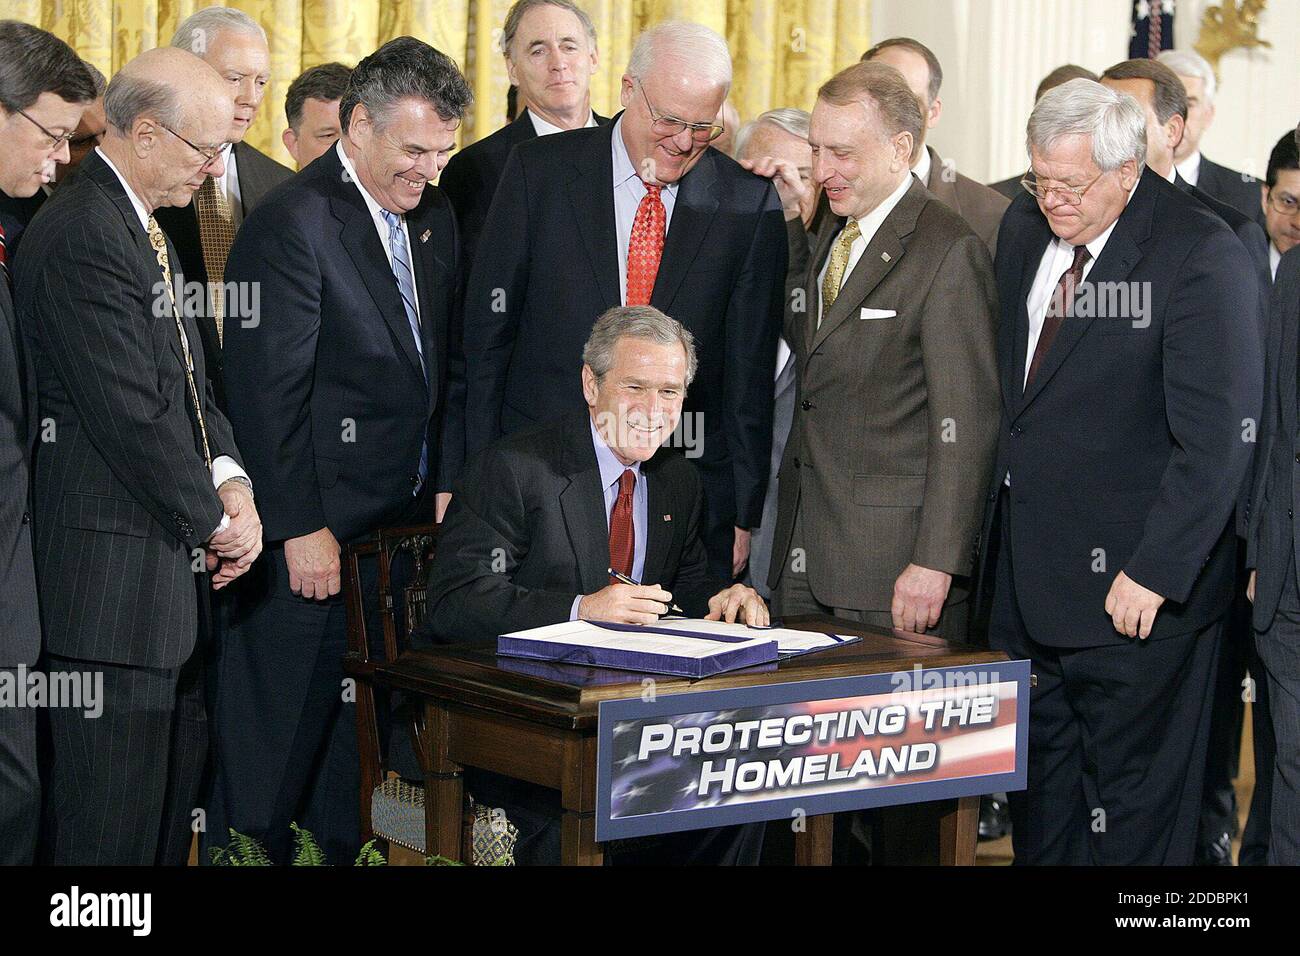 NO FILM, NO VIDEO, NO TV, NO DOCUMENTARY - President Bush signs a renewal of the USA Patriot Act, Thursday, March 9, 2006, a day before 16 major provisions of the old law expired, during a ceremony in the East Room of the White House. Photo by Chuck Kennedy/KRT/ABACAPRESS.COM Stock Photo